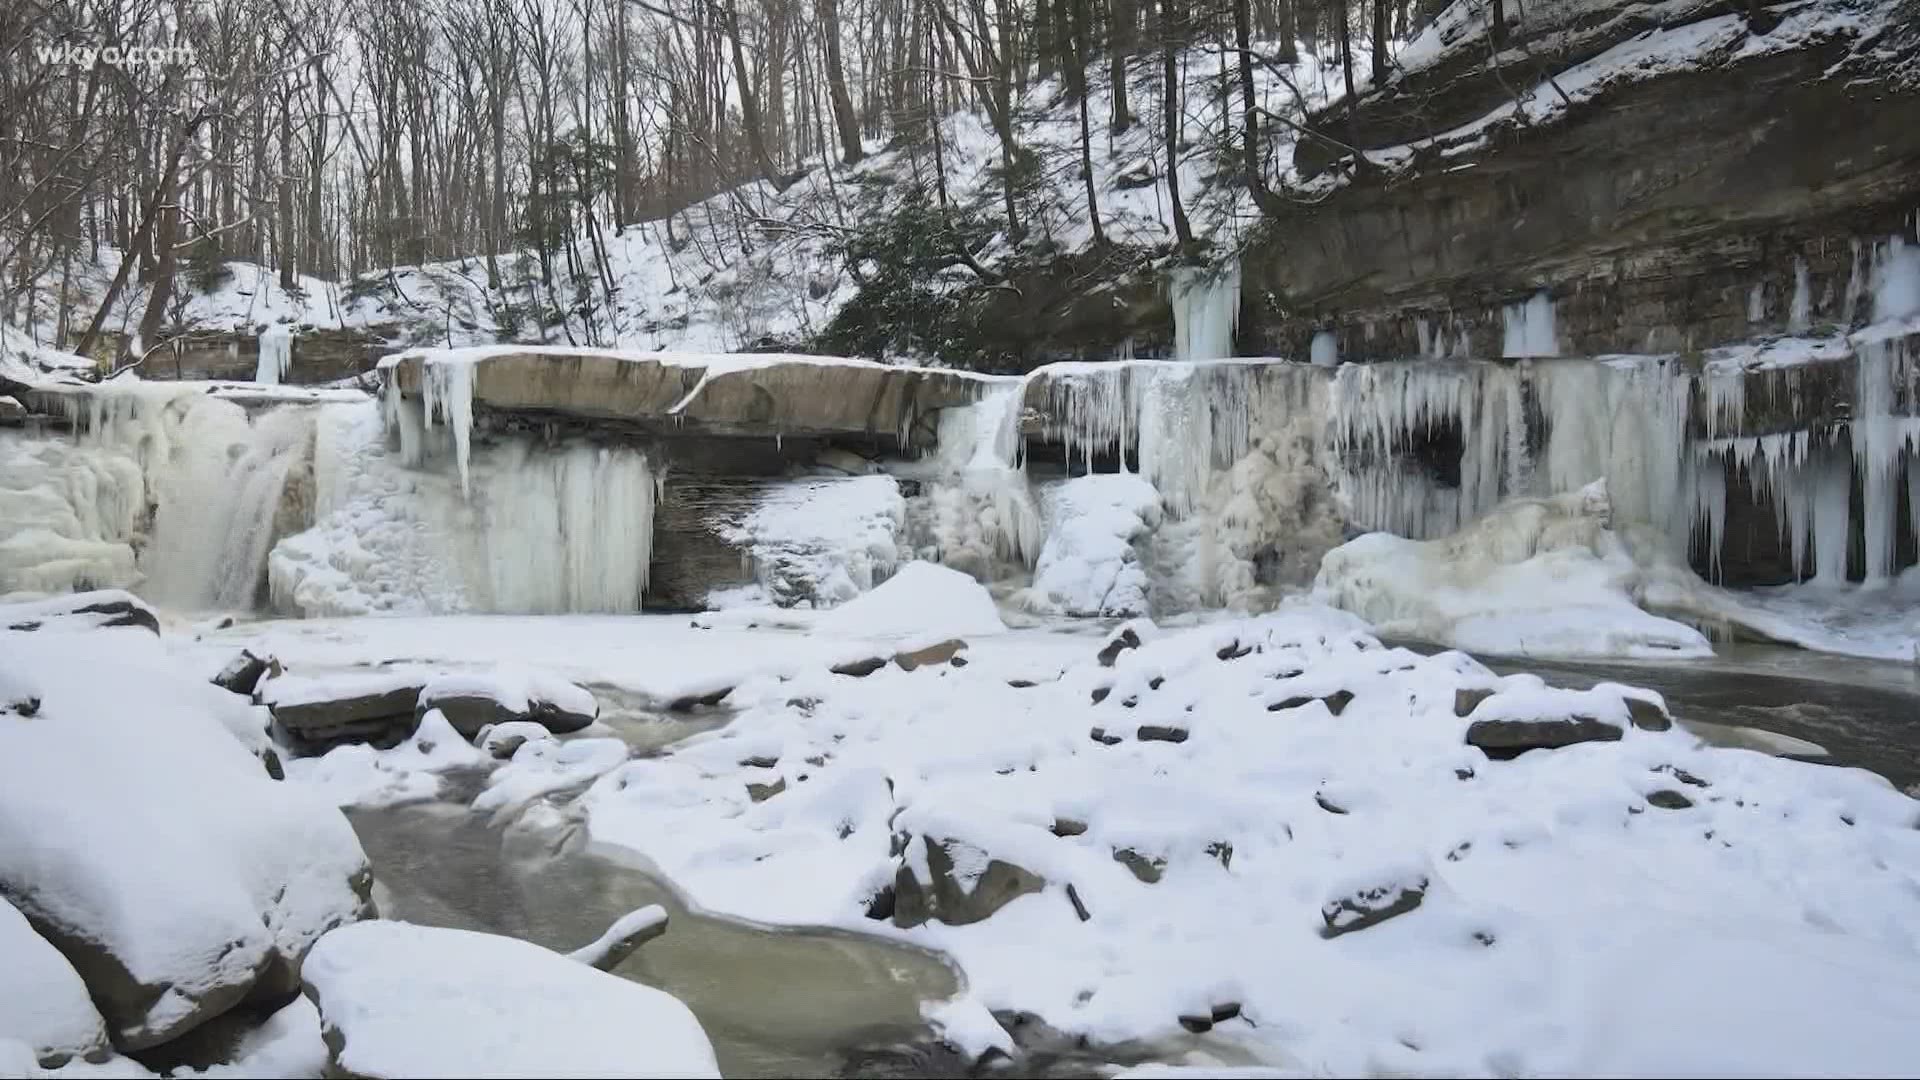 Feb. 19, 2021: Tinker Creek has transformed into a frozen masterpiece. It's the latest stop in our GO-HIO adventures with 3News' Matt Standridge.